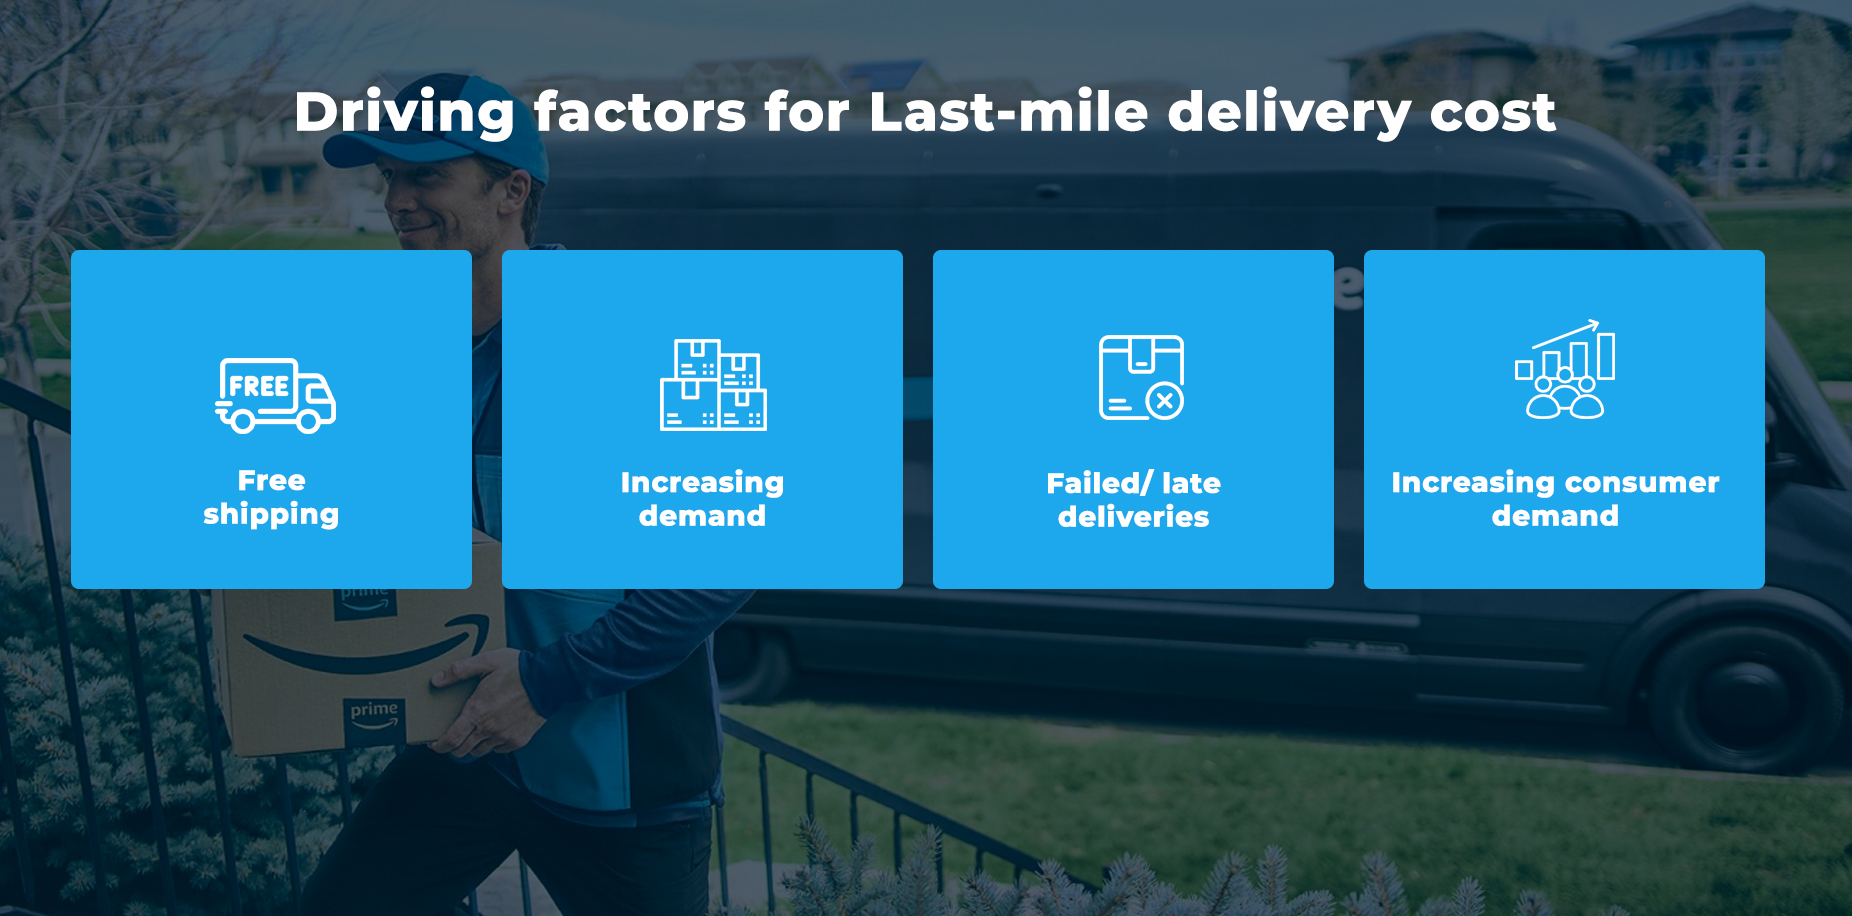 Driving factors for last-mile delivery